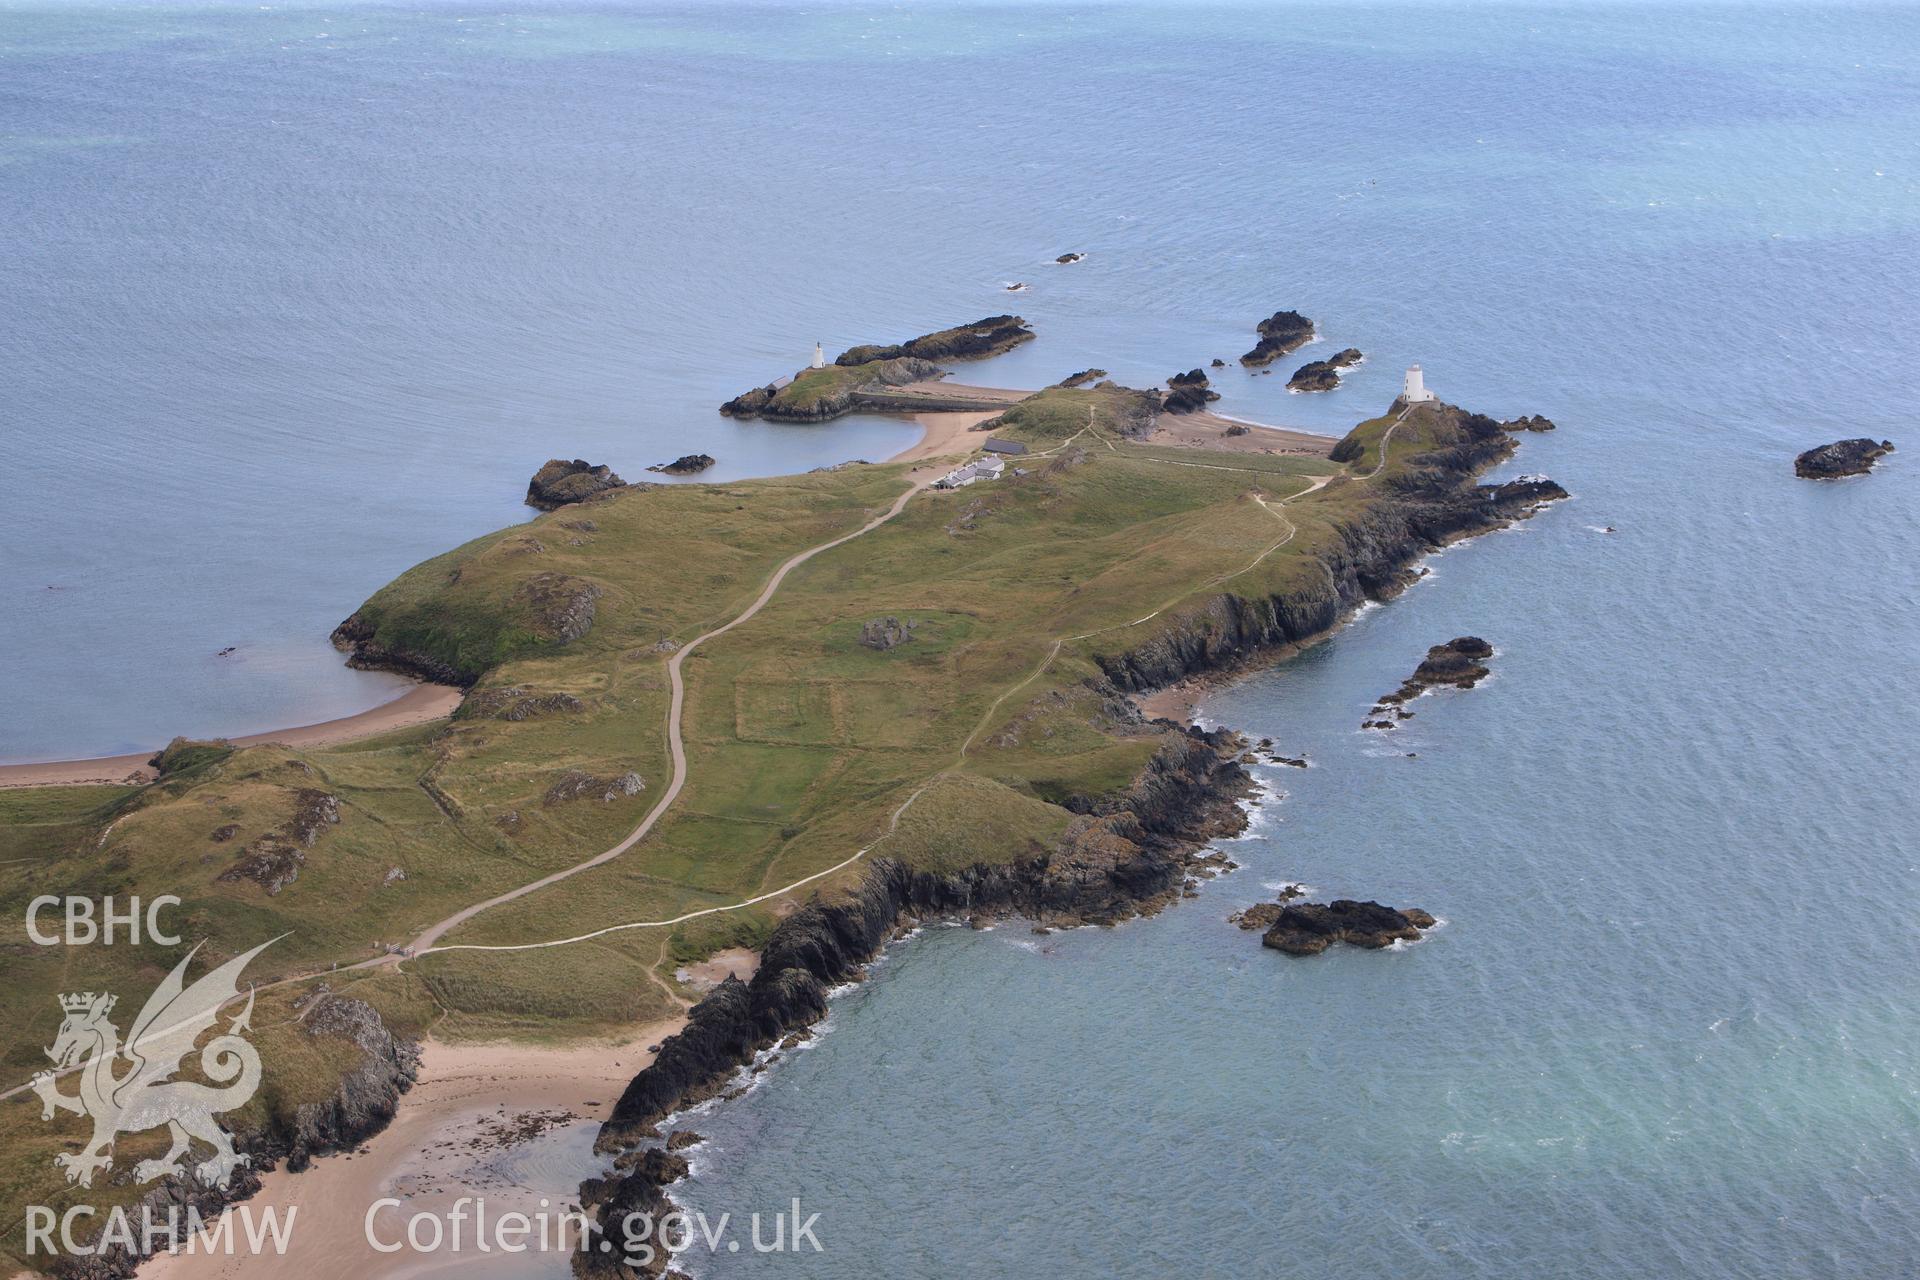 RCAHMW colour oblique photograph of Llanddwyn Island and lighthouse,. Taken by Toby Driver on 20/07/2011.